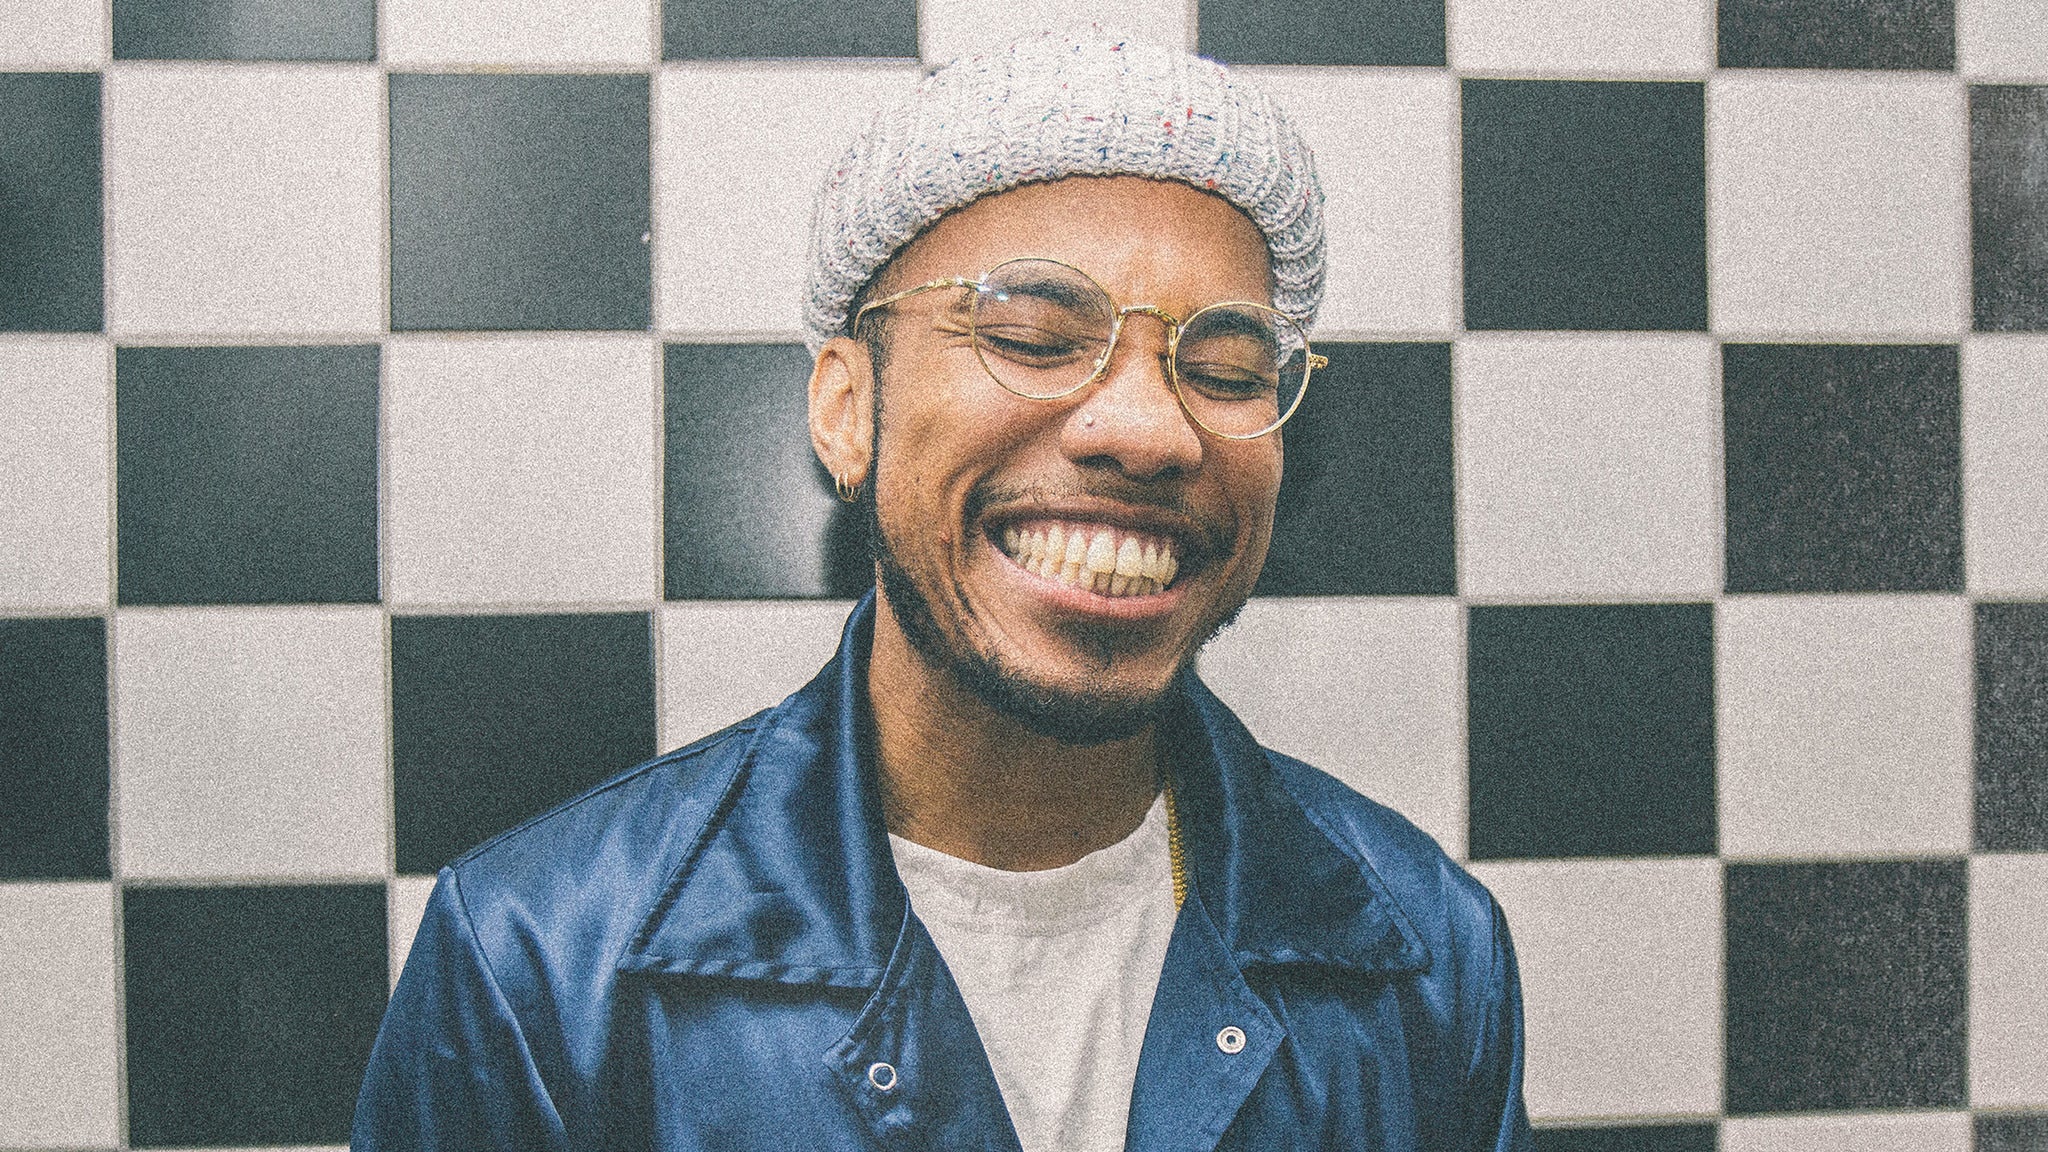 Anderson .Paak & The Free Nationals in Atlanta promo photo for Artist presale offer code